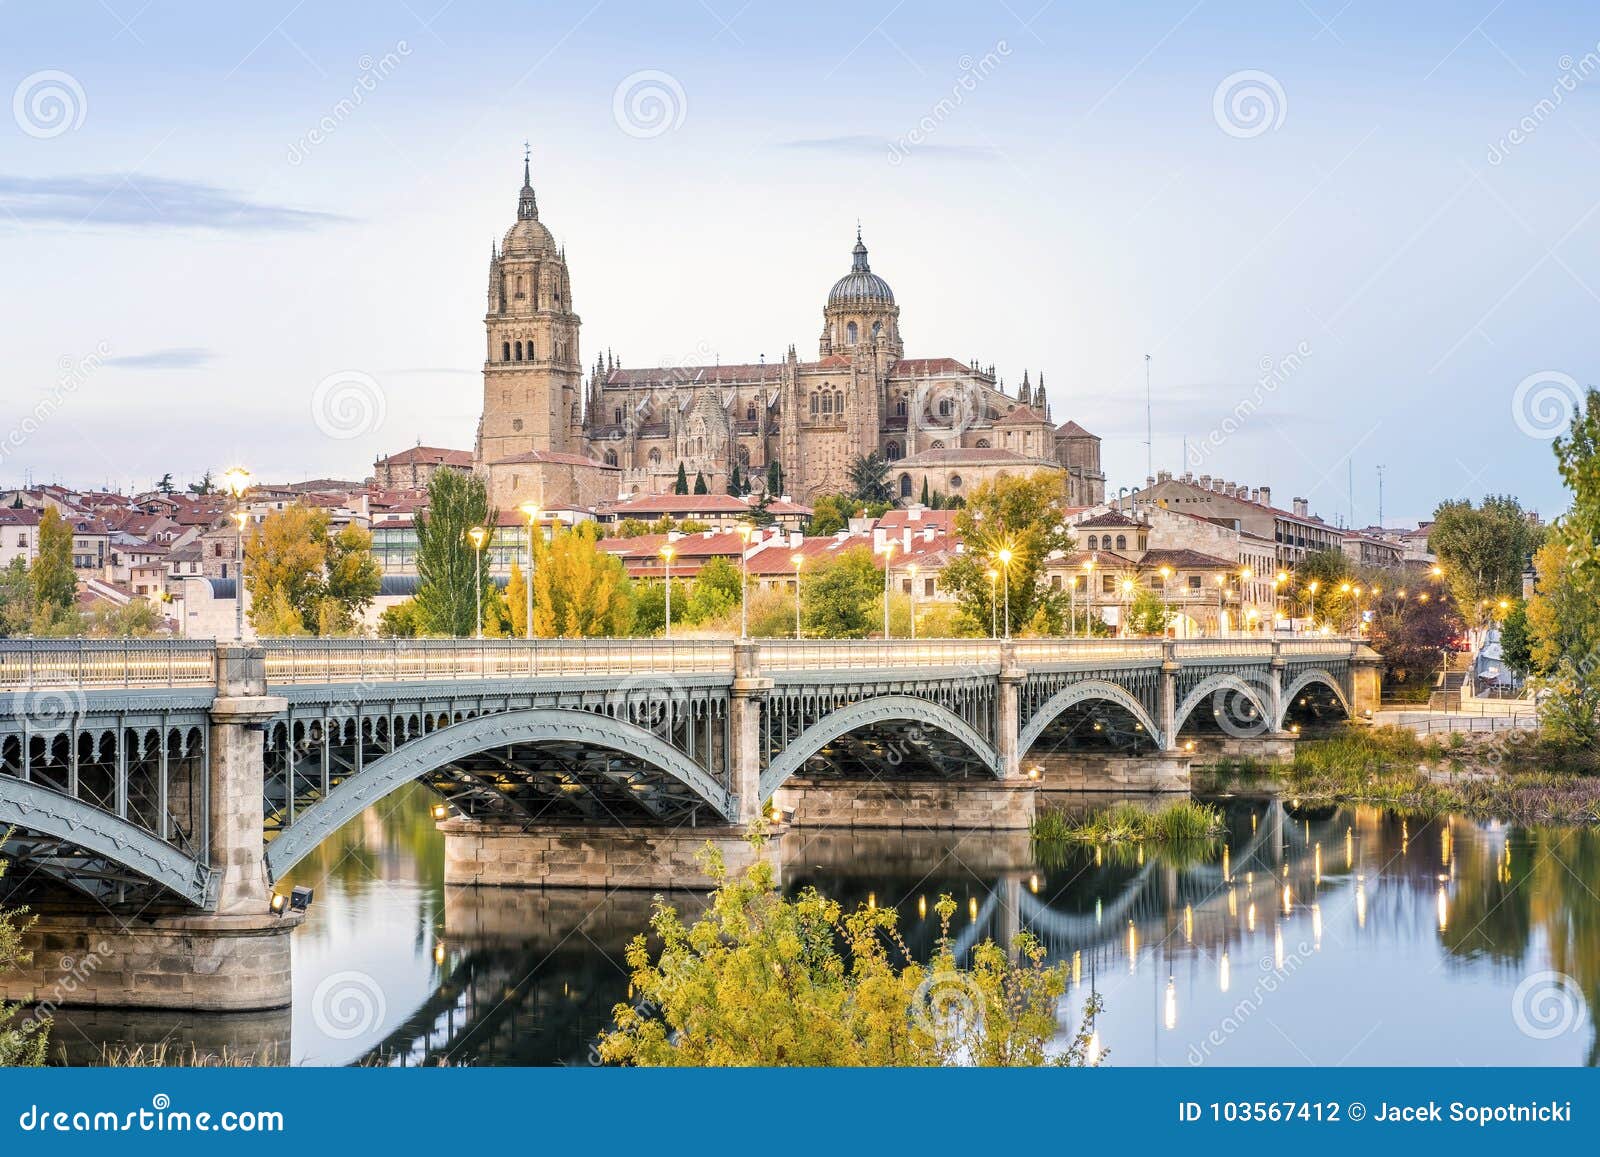 cathedral of salamanca and bridge over tormes river, spain